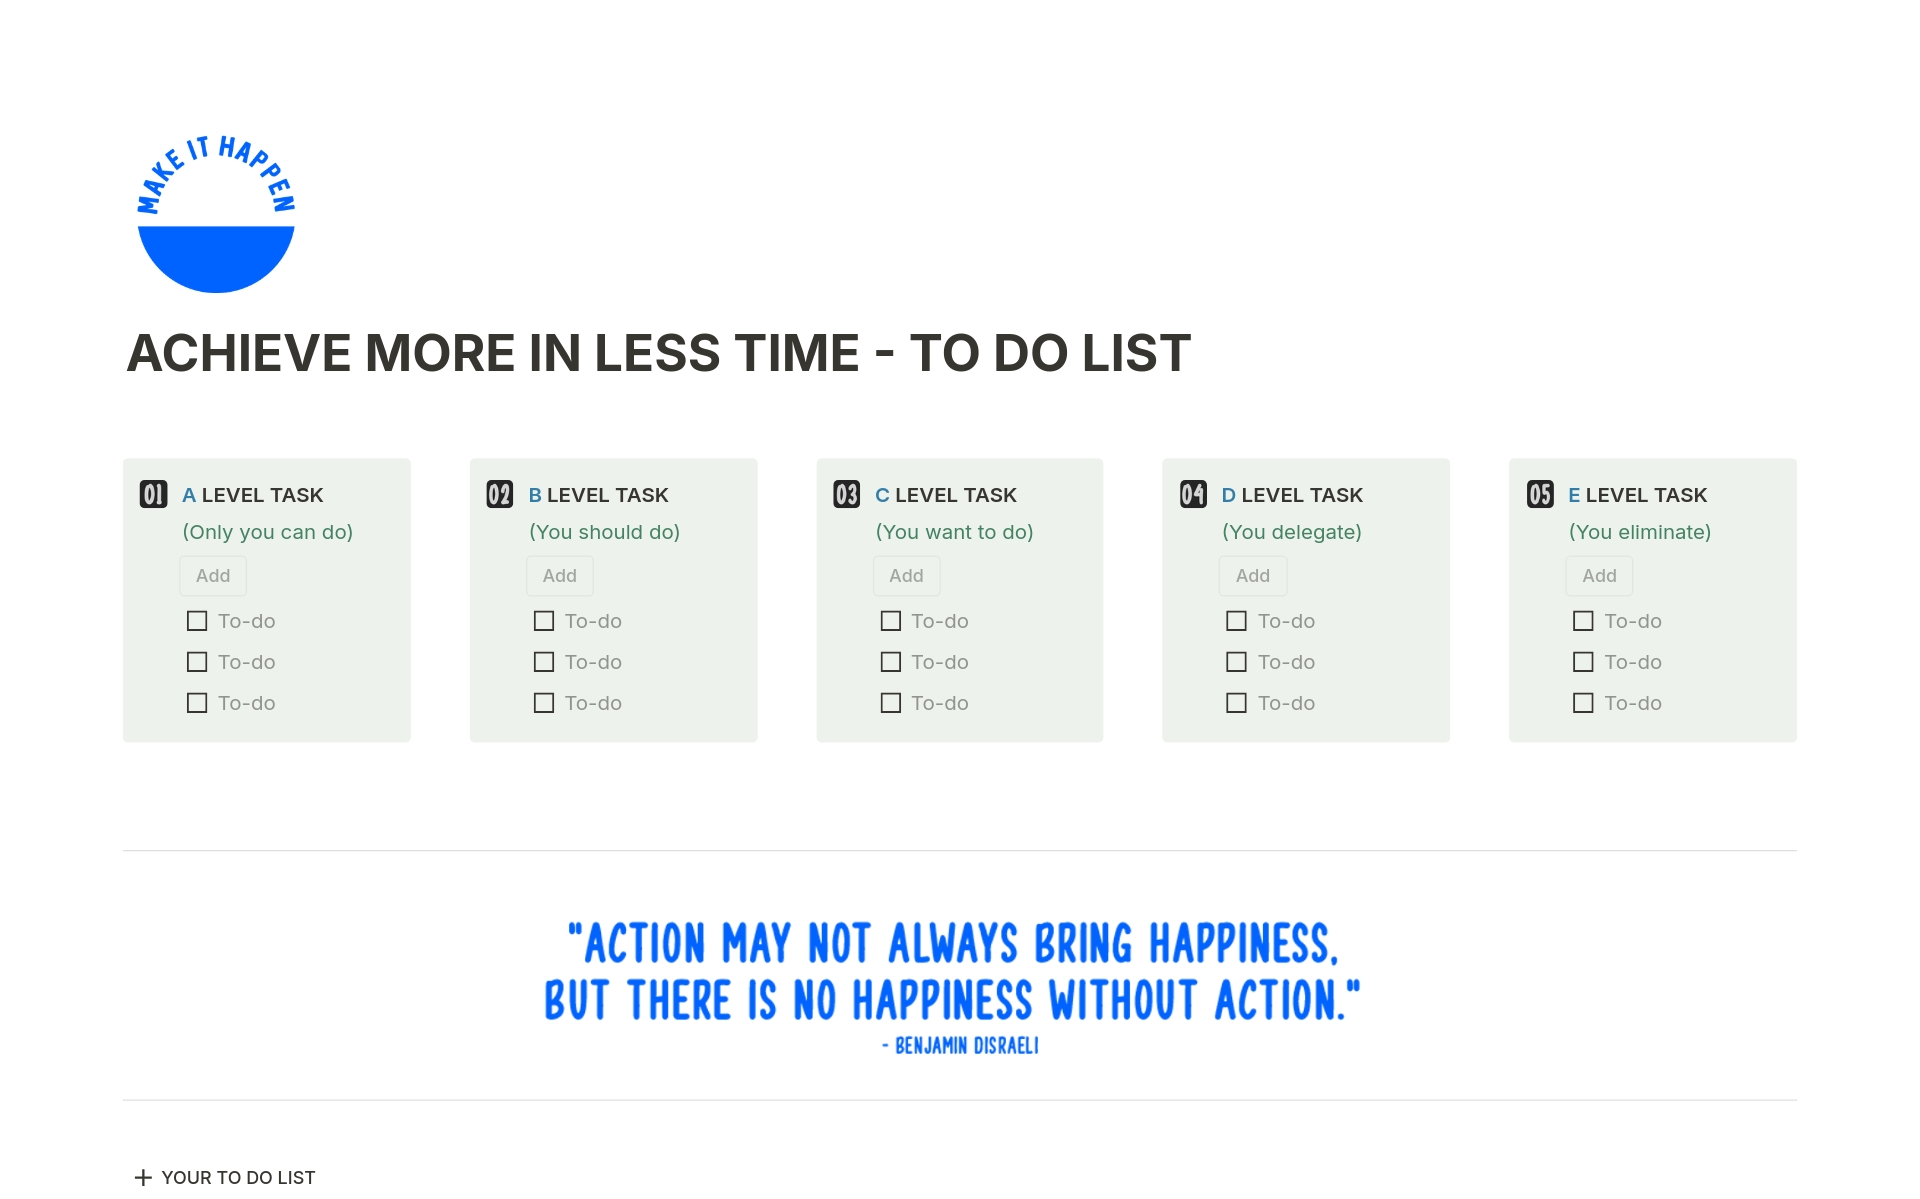 ACHIEVE MORE IN LESS TIME - TO DO LISTのテンプレートのプレビュー